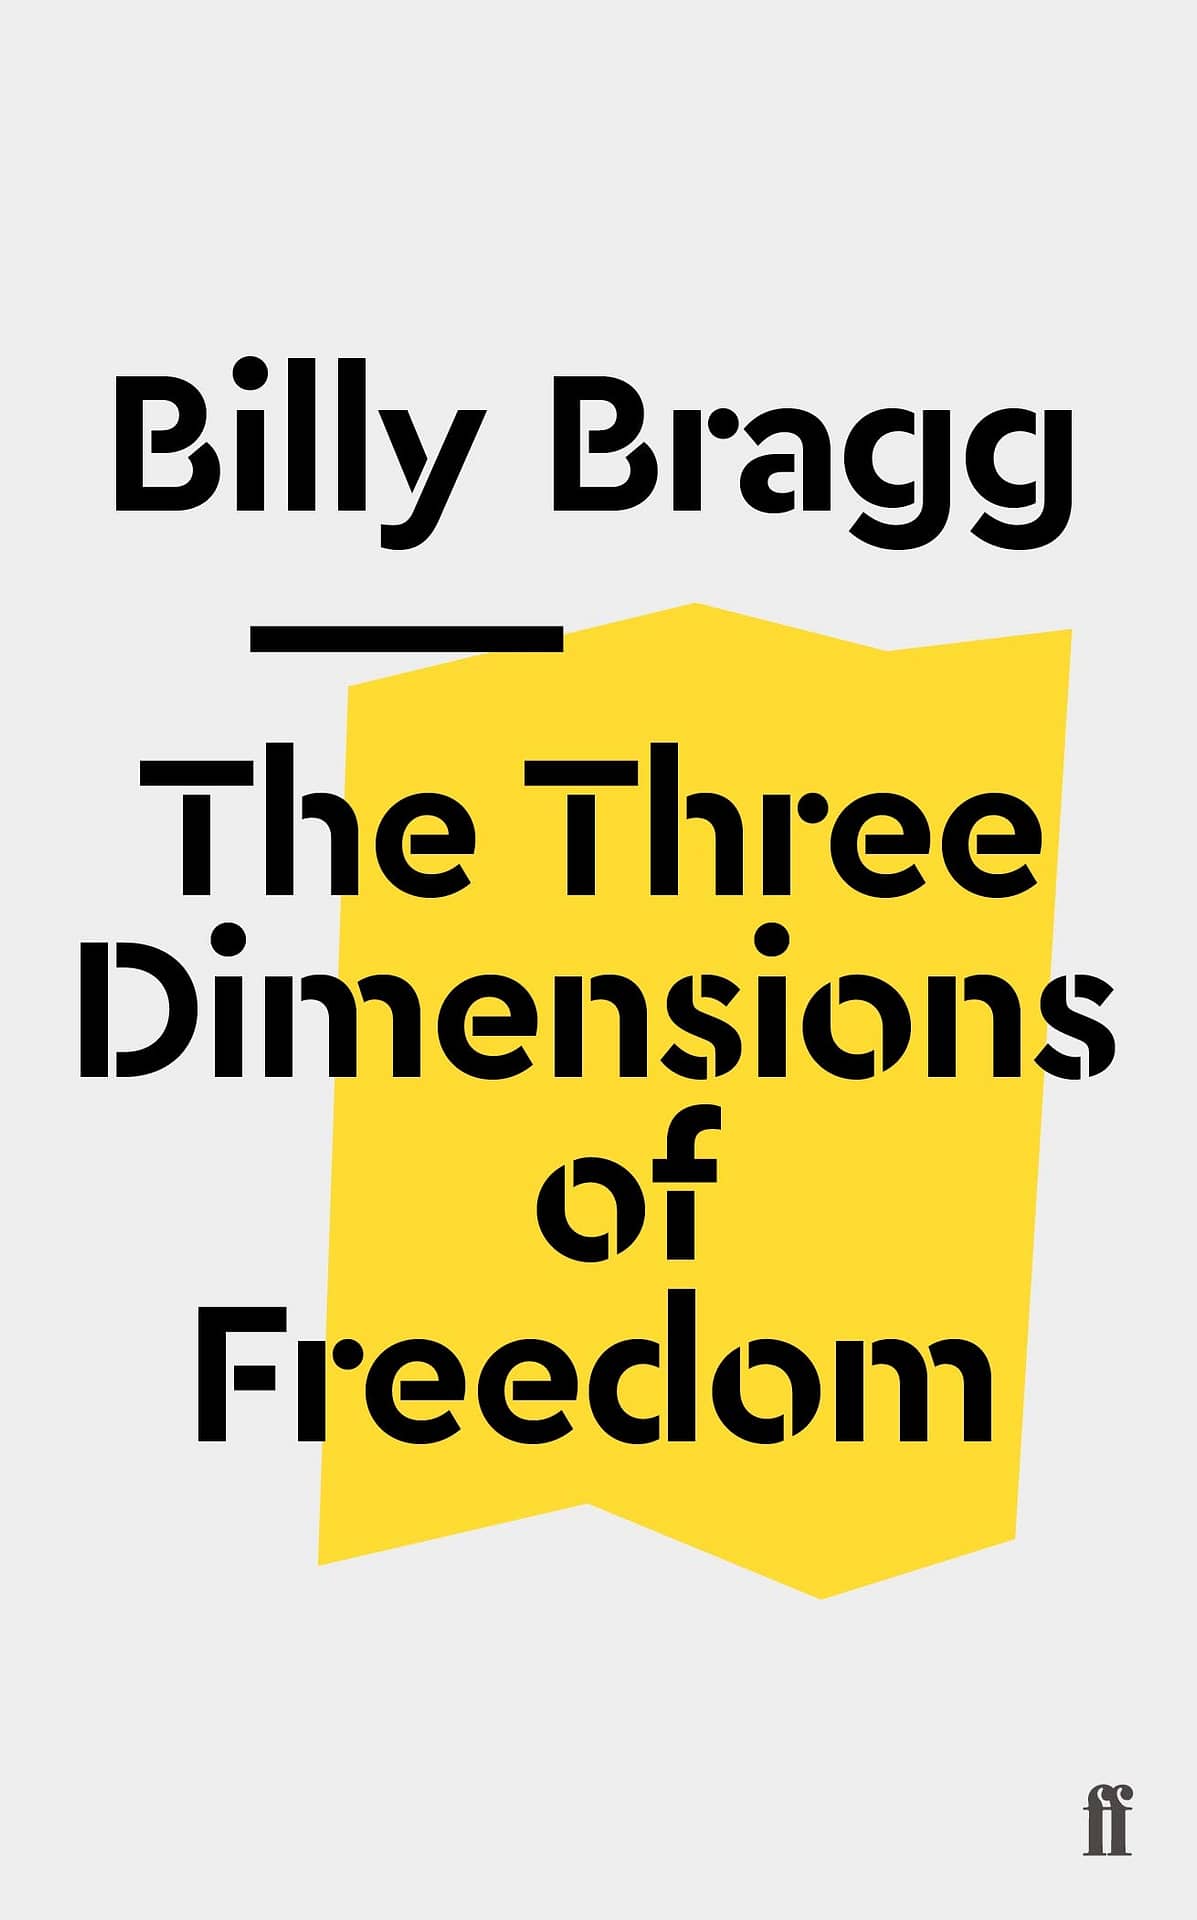 Billy Bragg – The Three Dimensions of Freedom